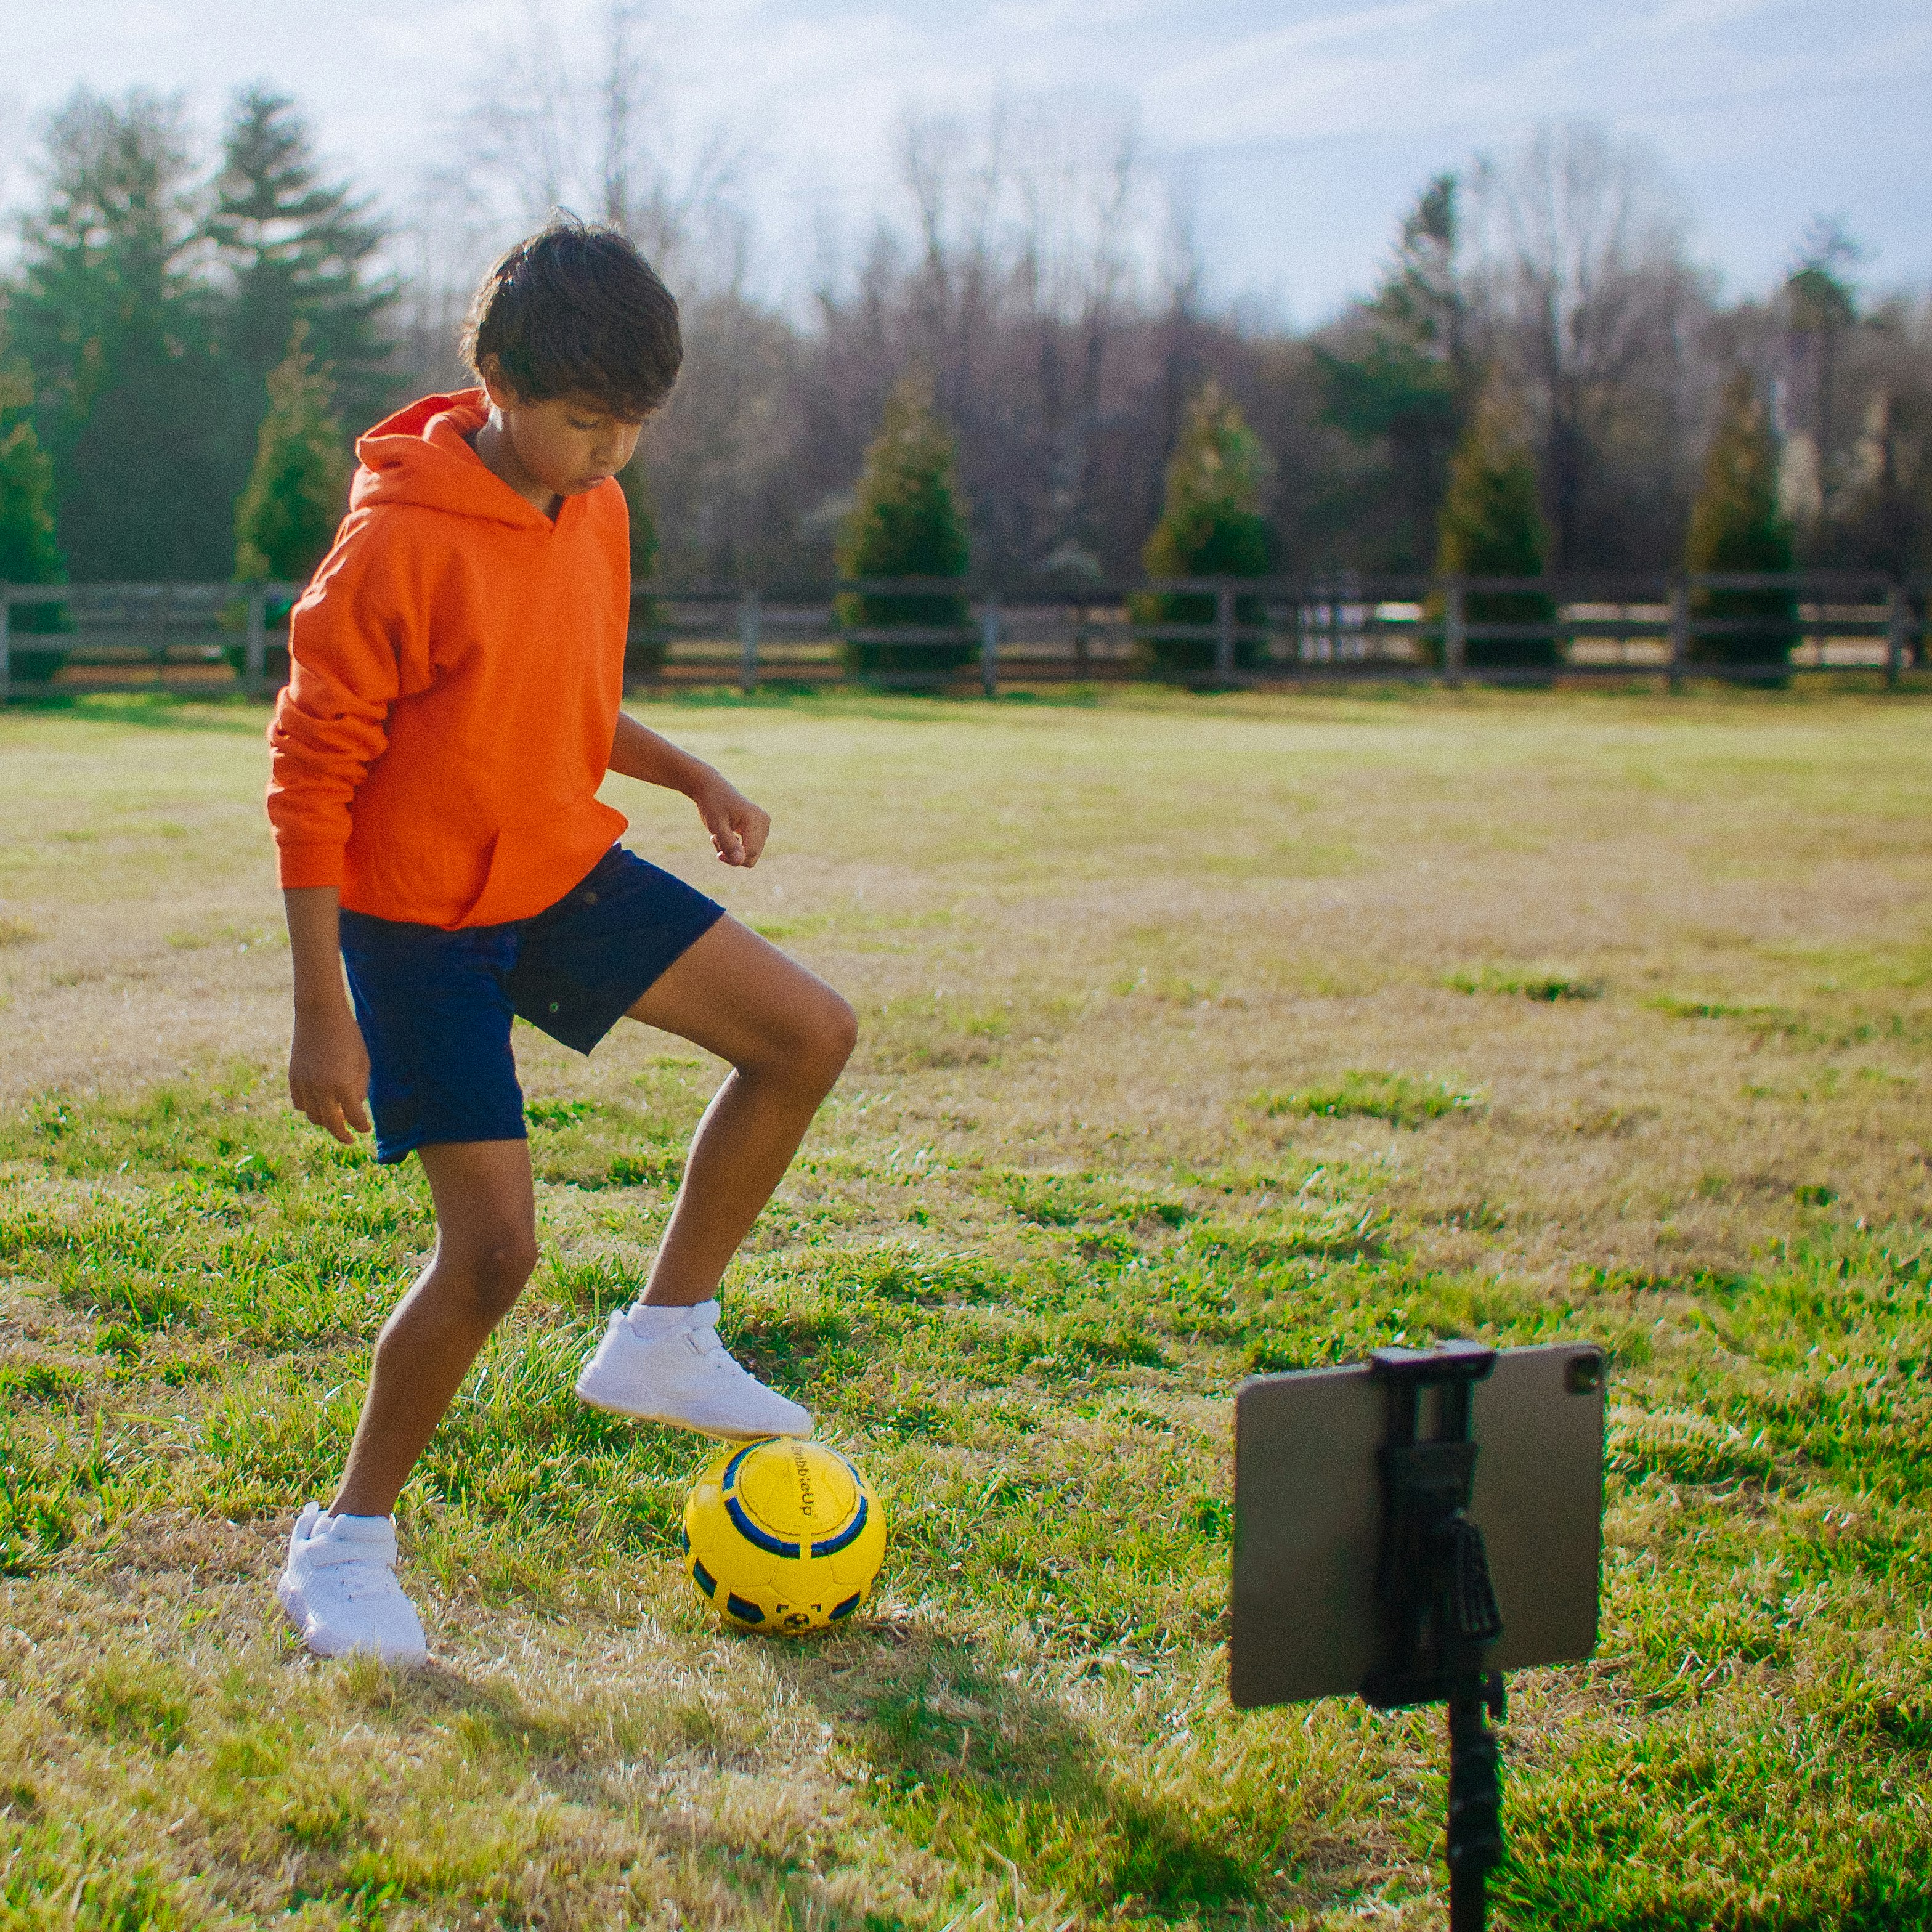 Young child training with a soccer ball in his yard.